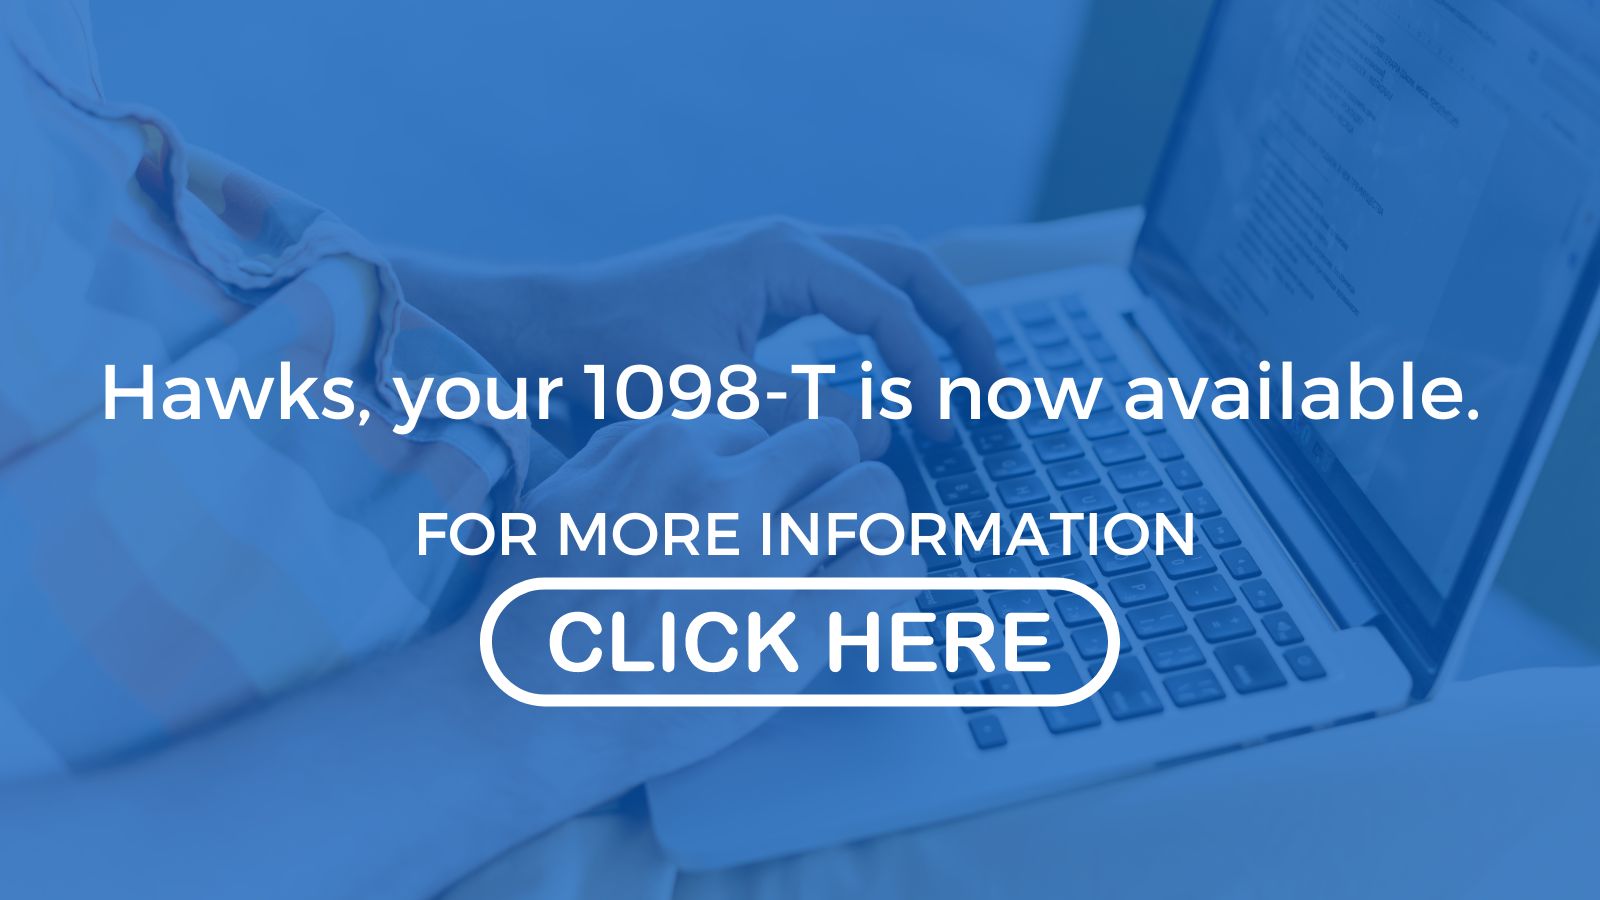 Information on availability of 1098-T with a laptop and hands in backgroun